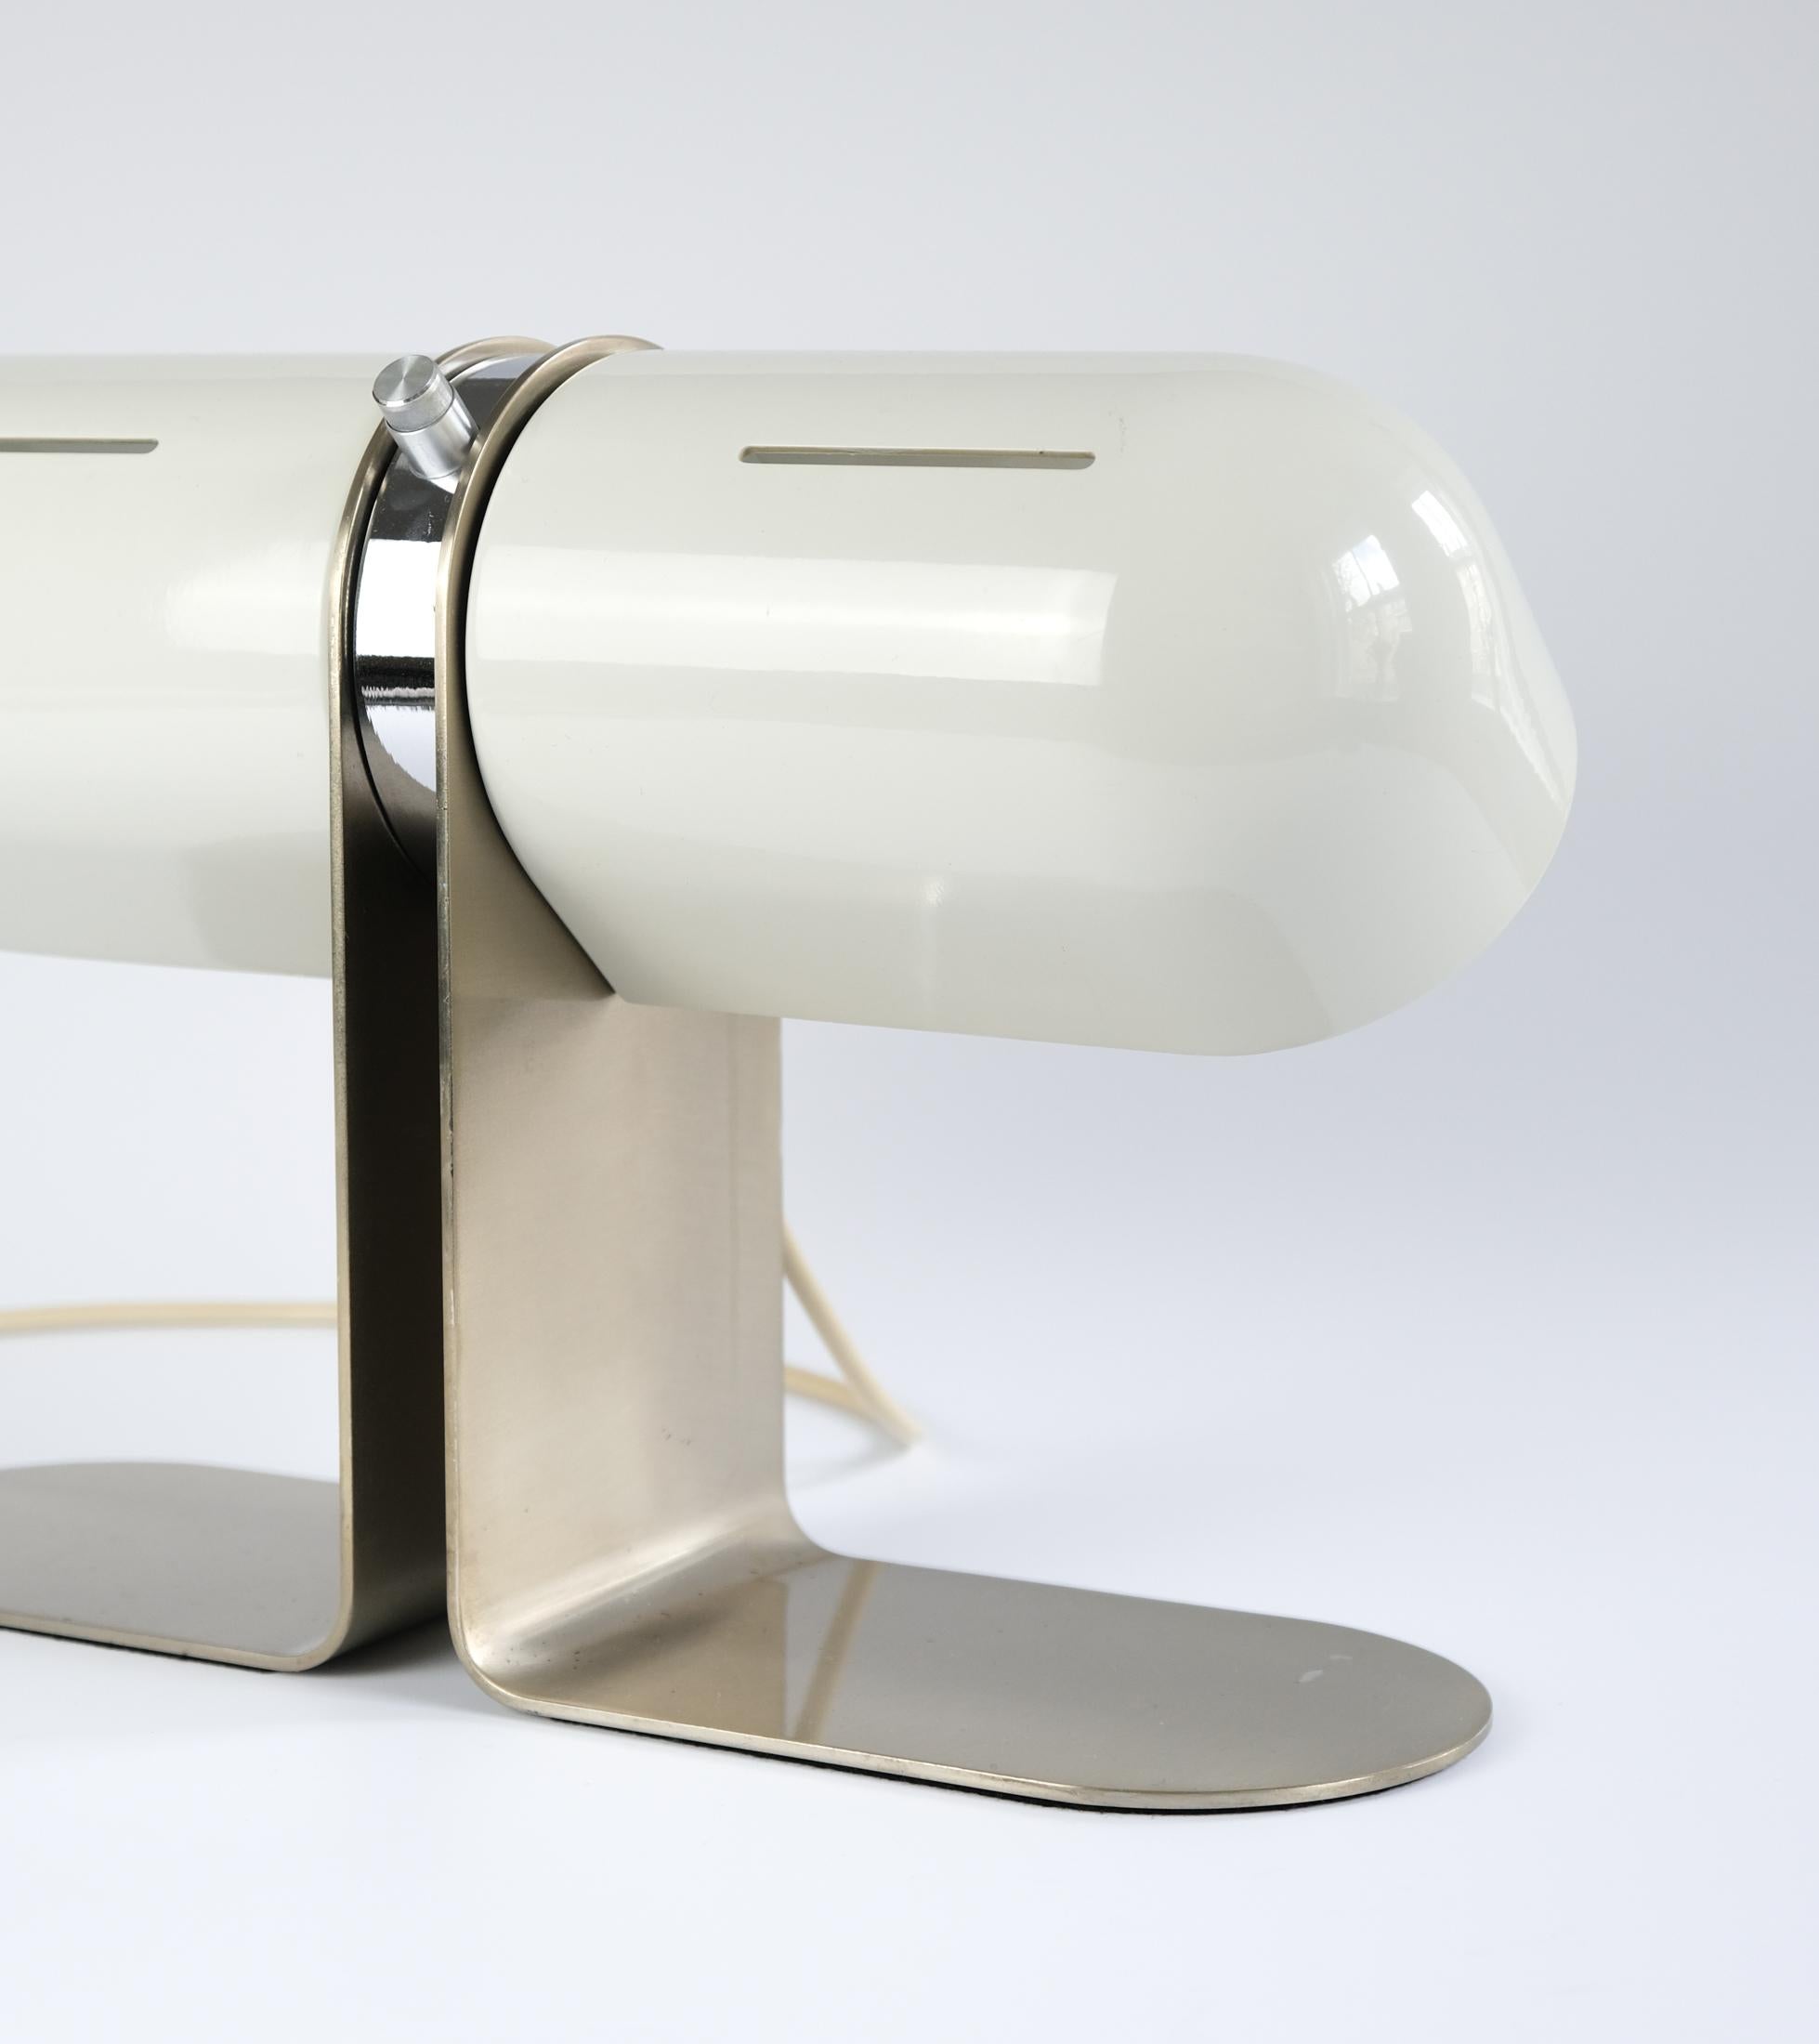 Early André Ricard Mid-Century Table Lamp For Metalarte, Spain 1973 In Good Condition For Sale In London, GB